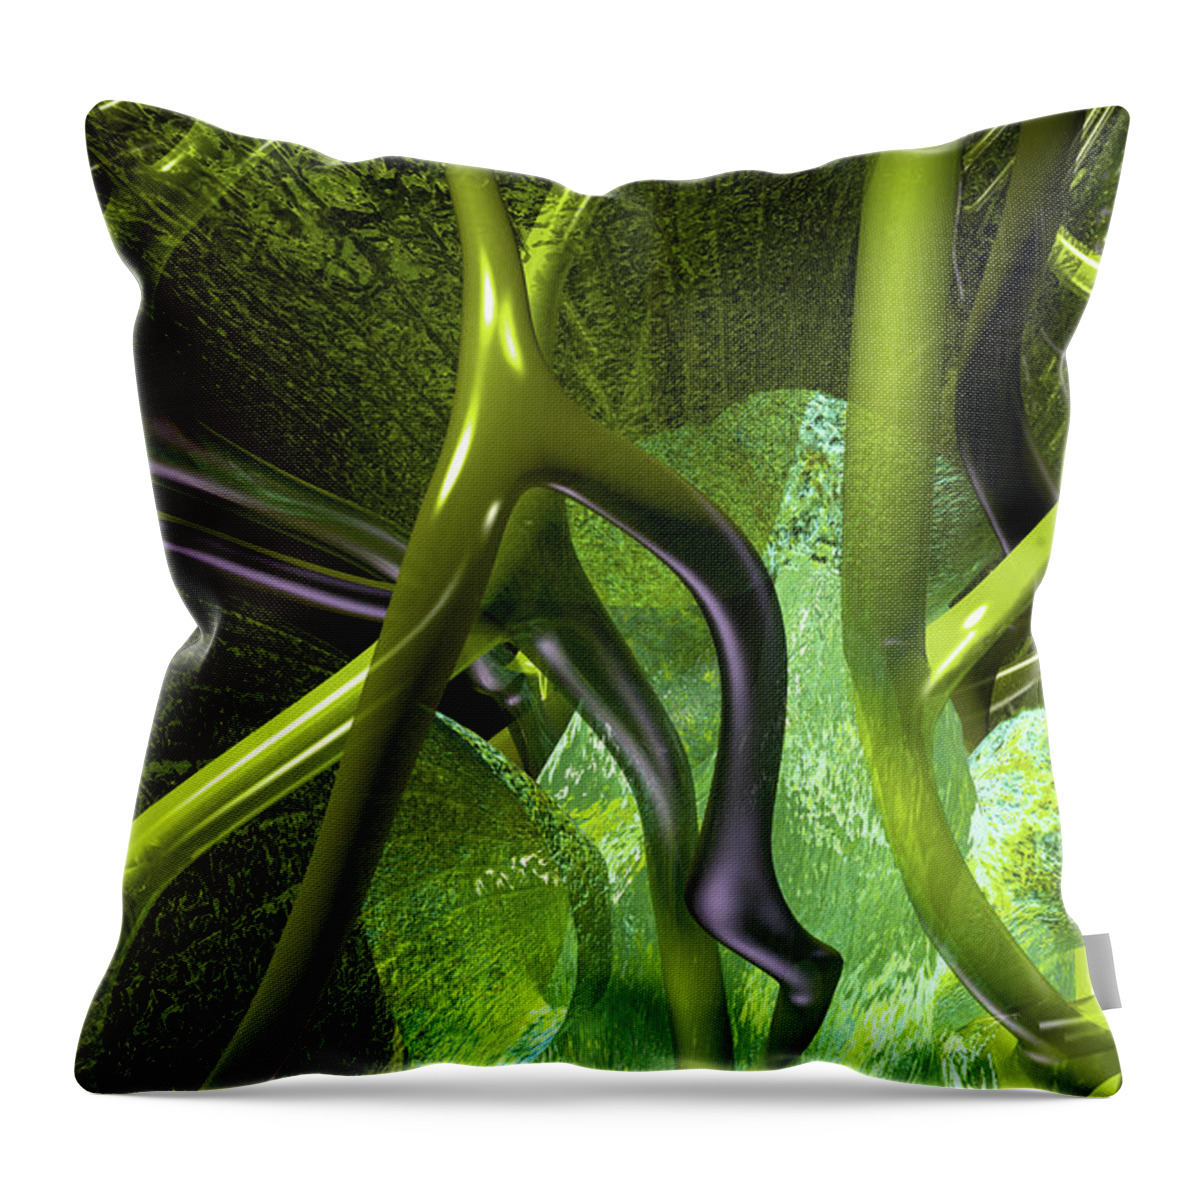 Trunk Throw Pillow featuring the digital art Kidney Abstract 2 Green by Russell Kightley